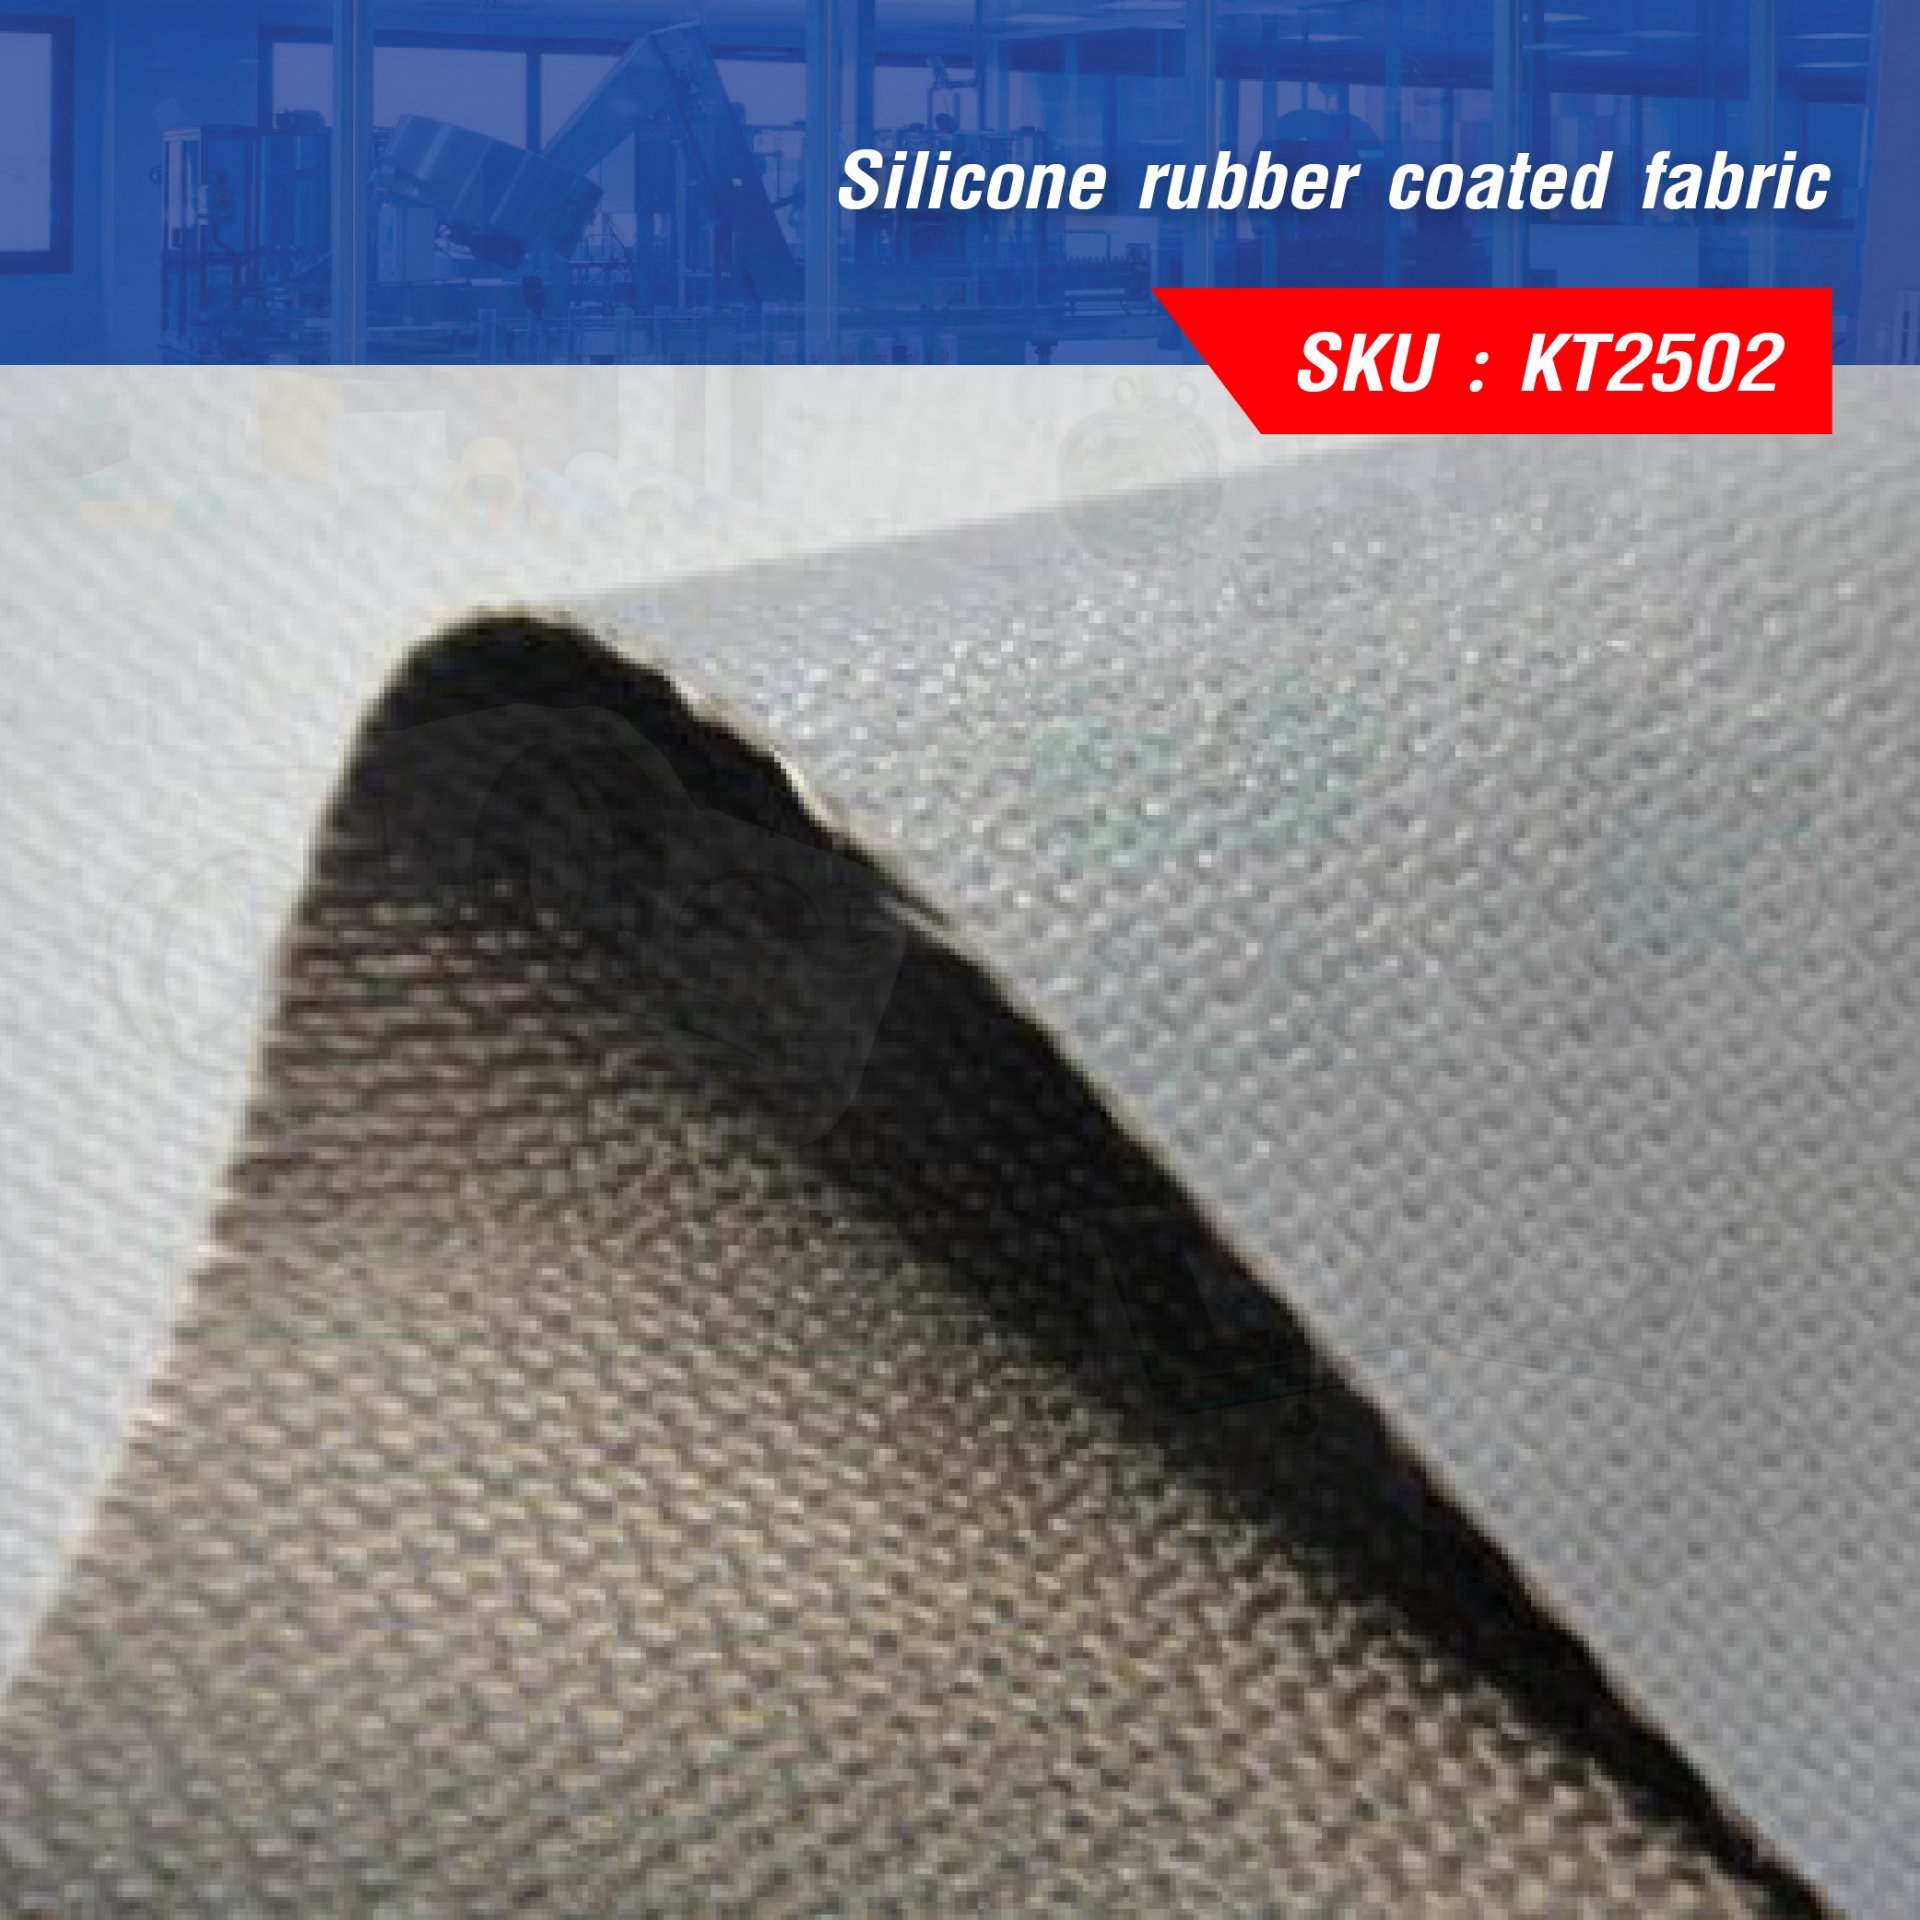 Silicone rubber coated fabric